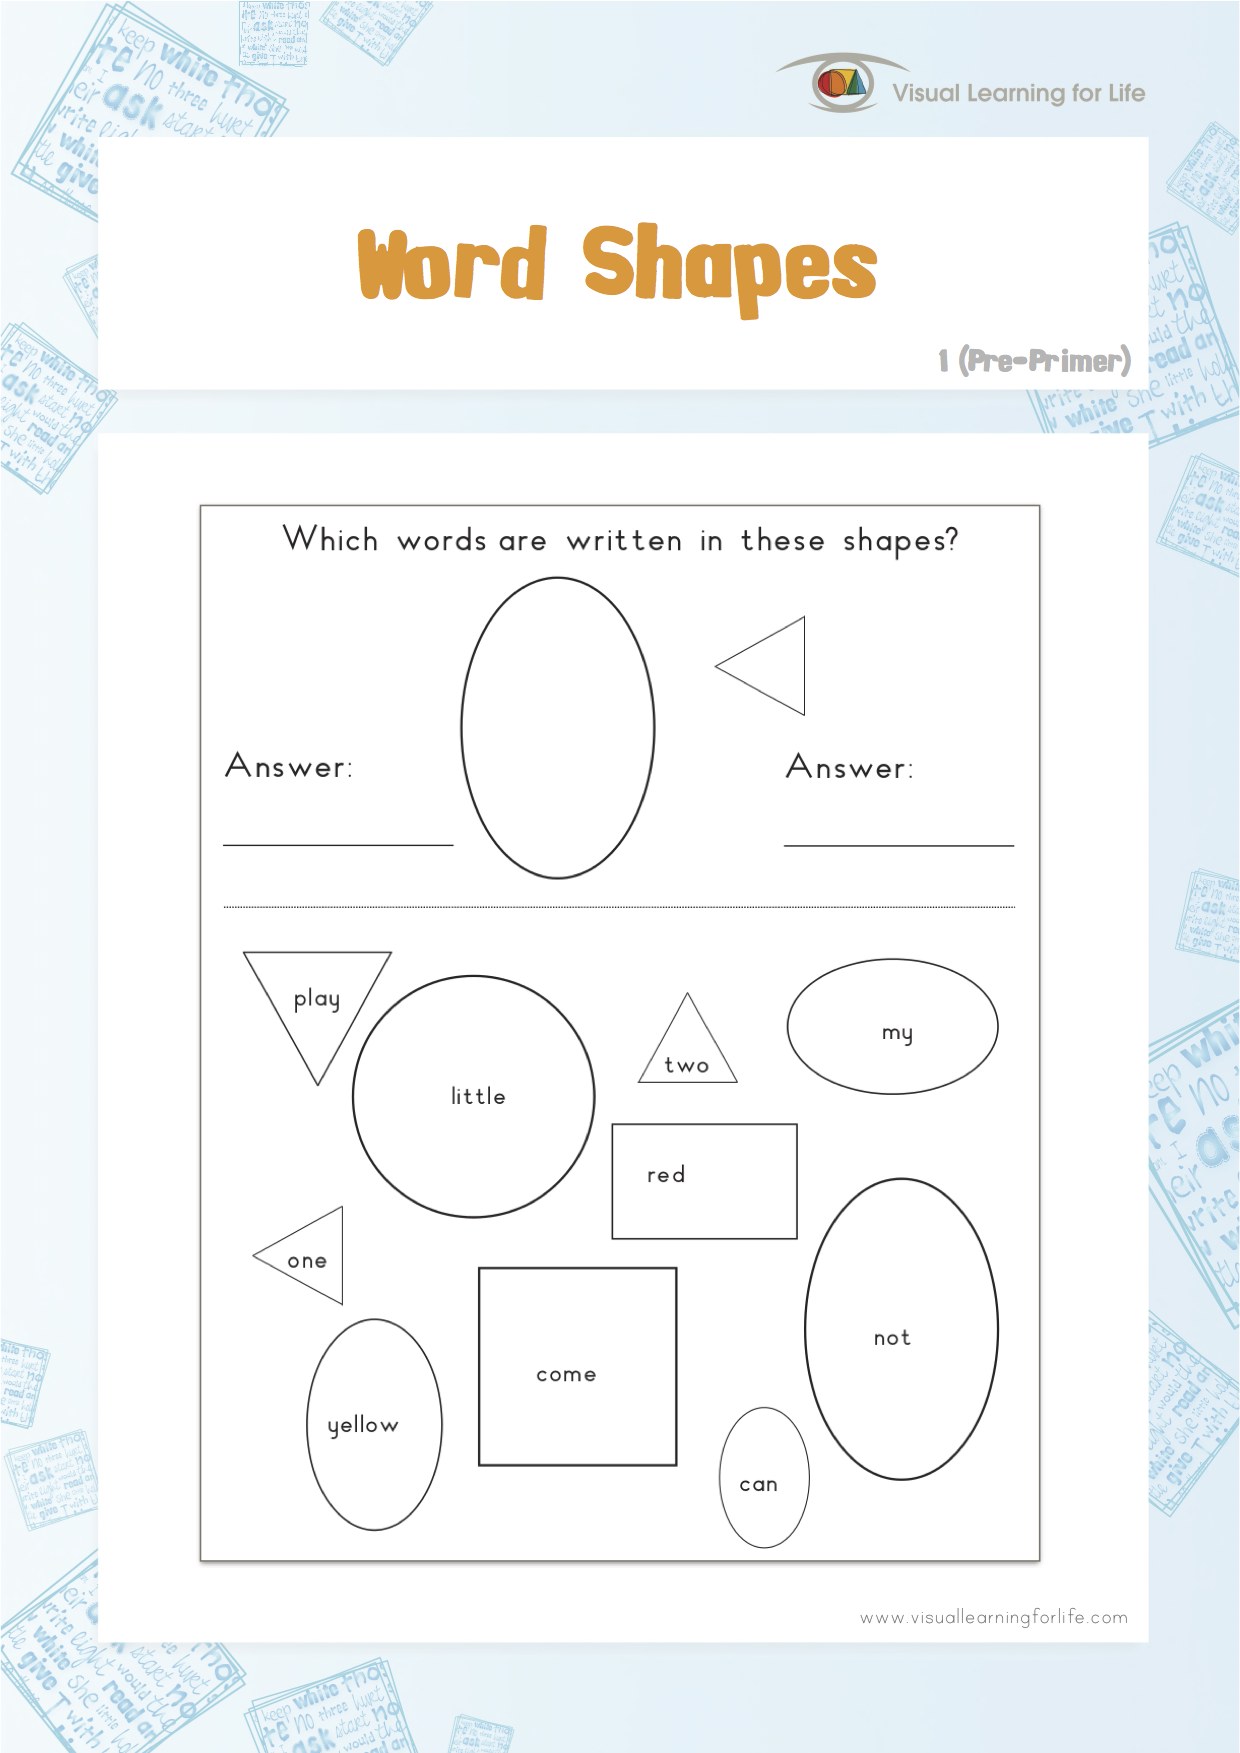 Word Shapes 1